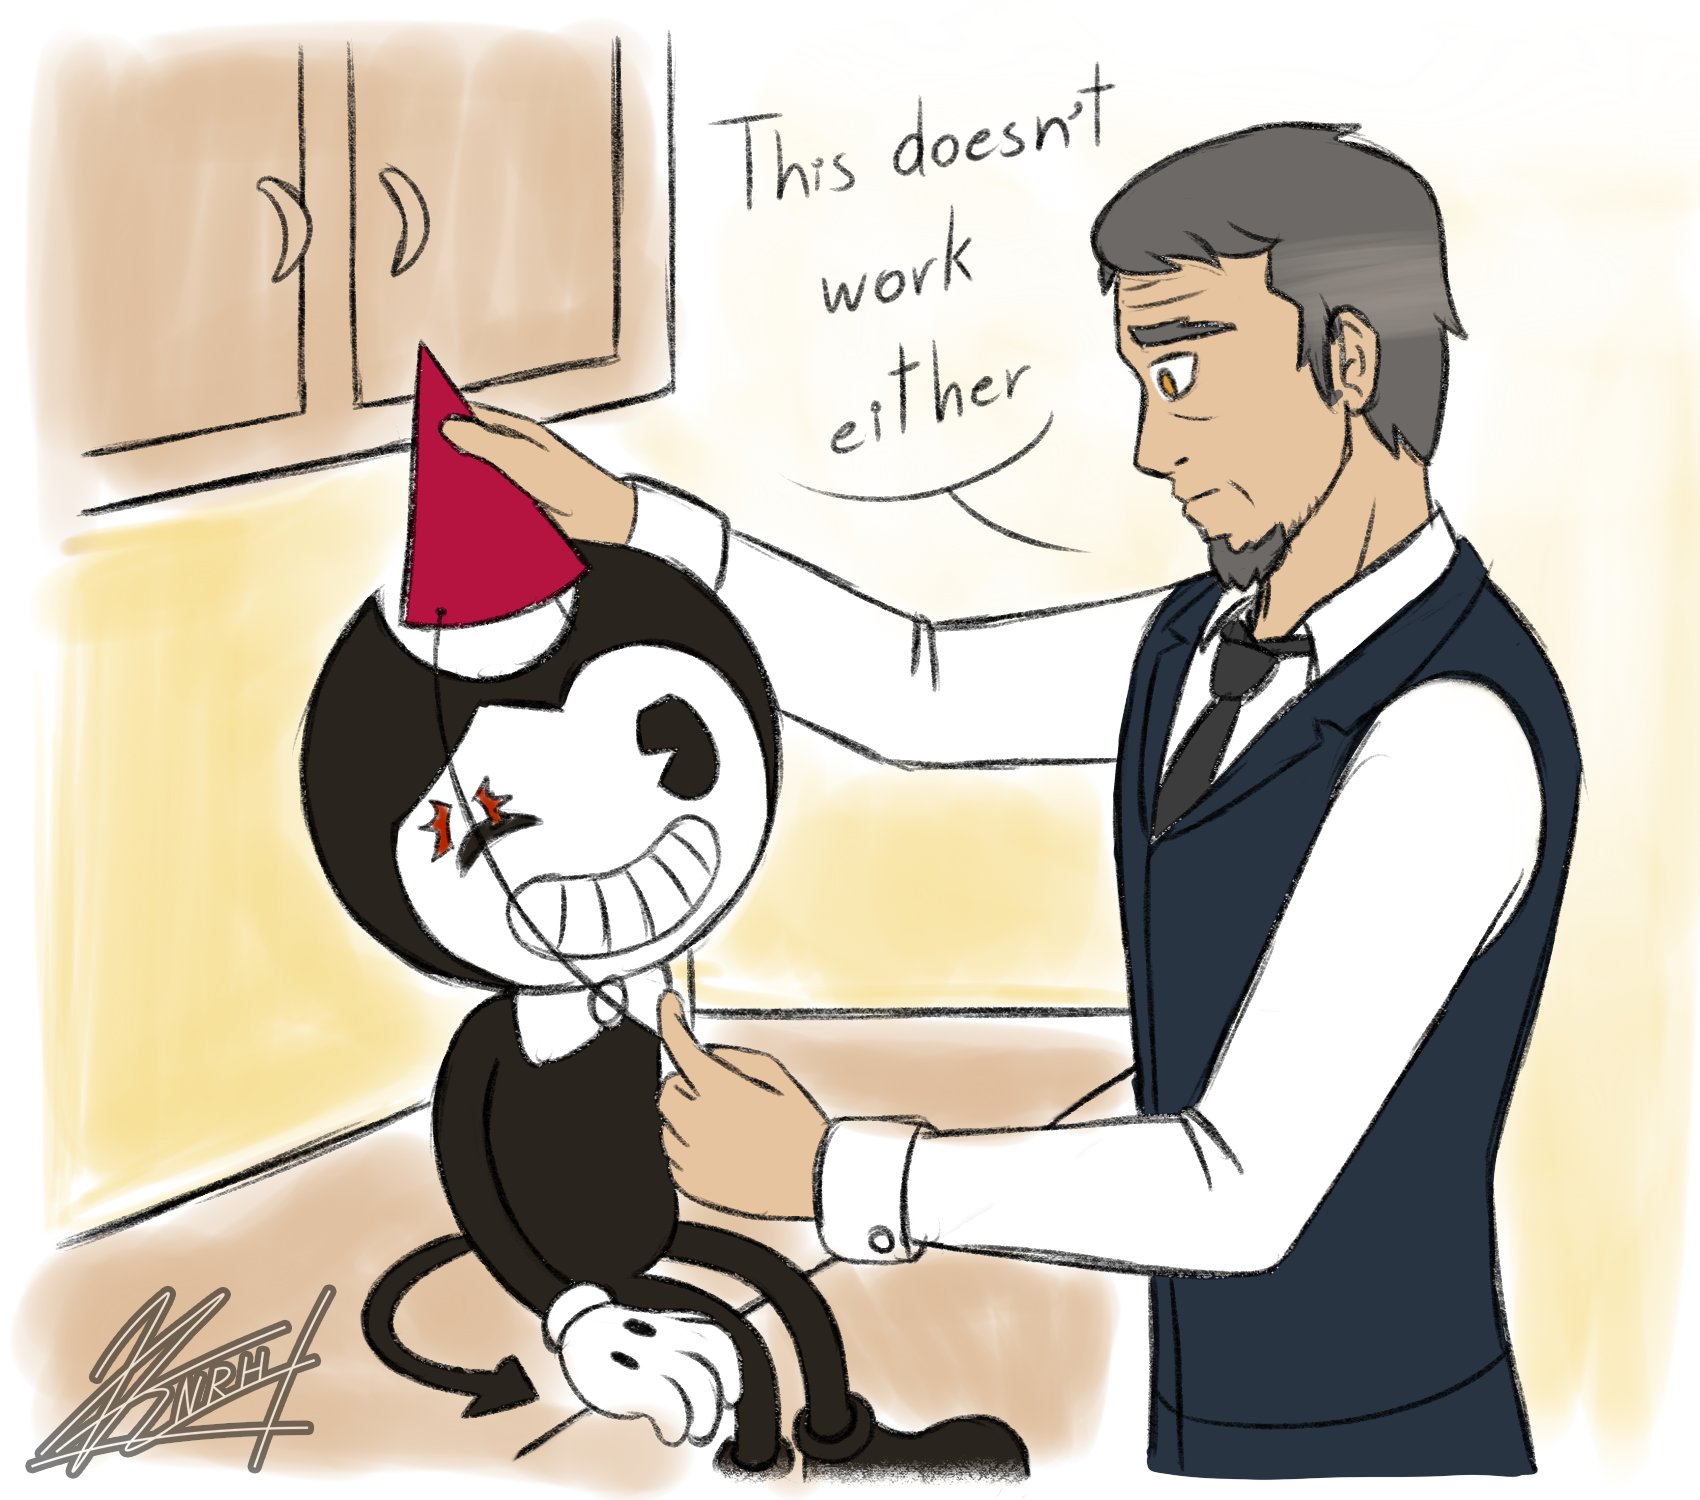 🌙elysian12moonlight🌠 on Twitter: "Nothing will stop Bendy from wearing